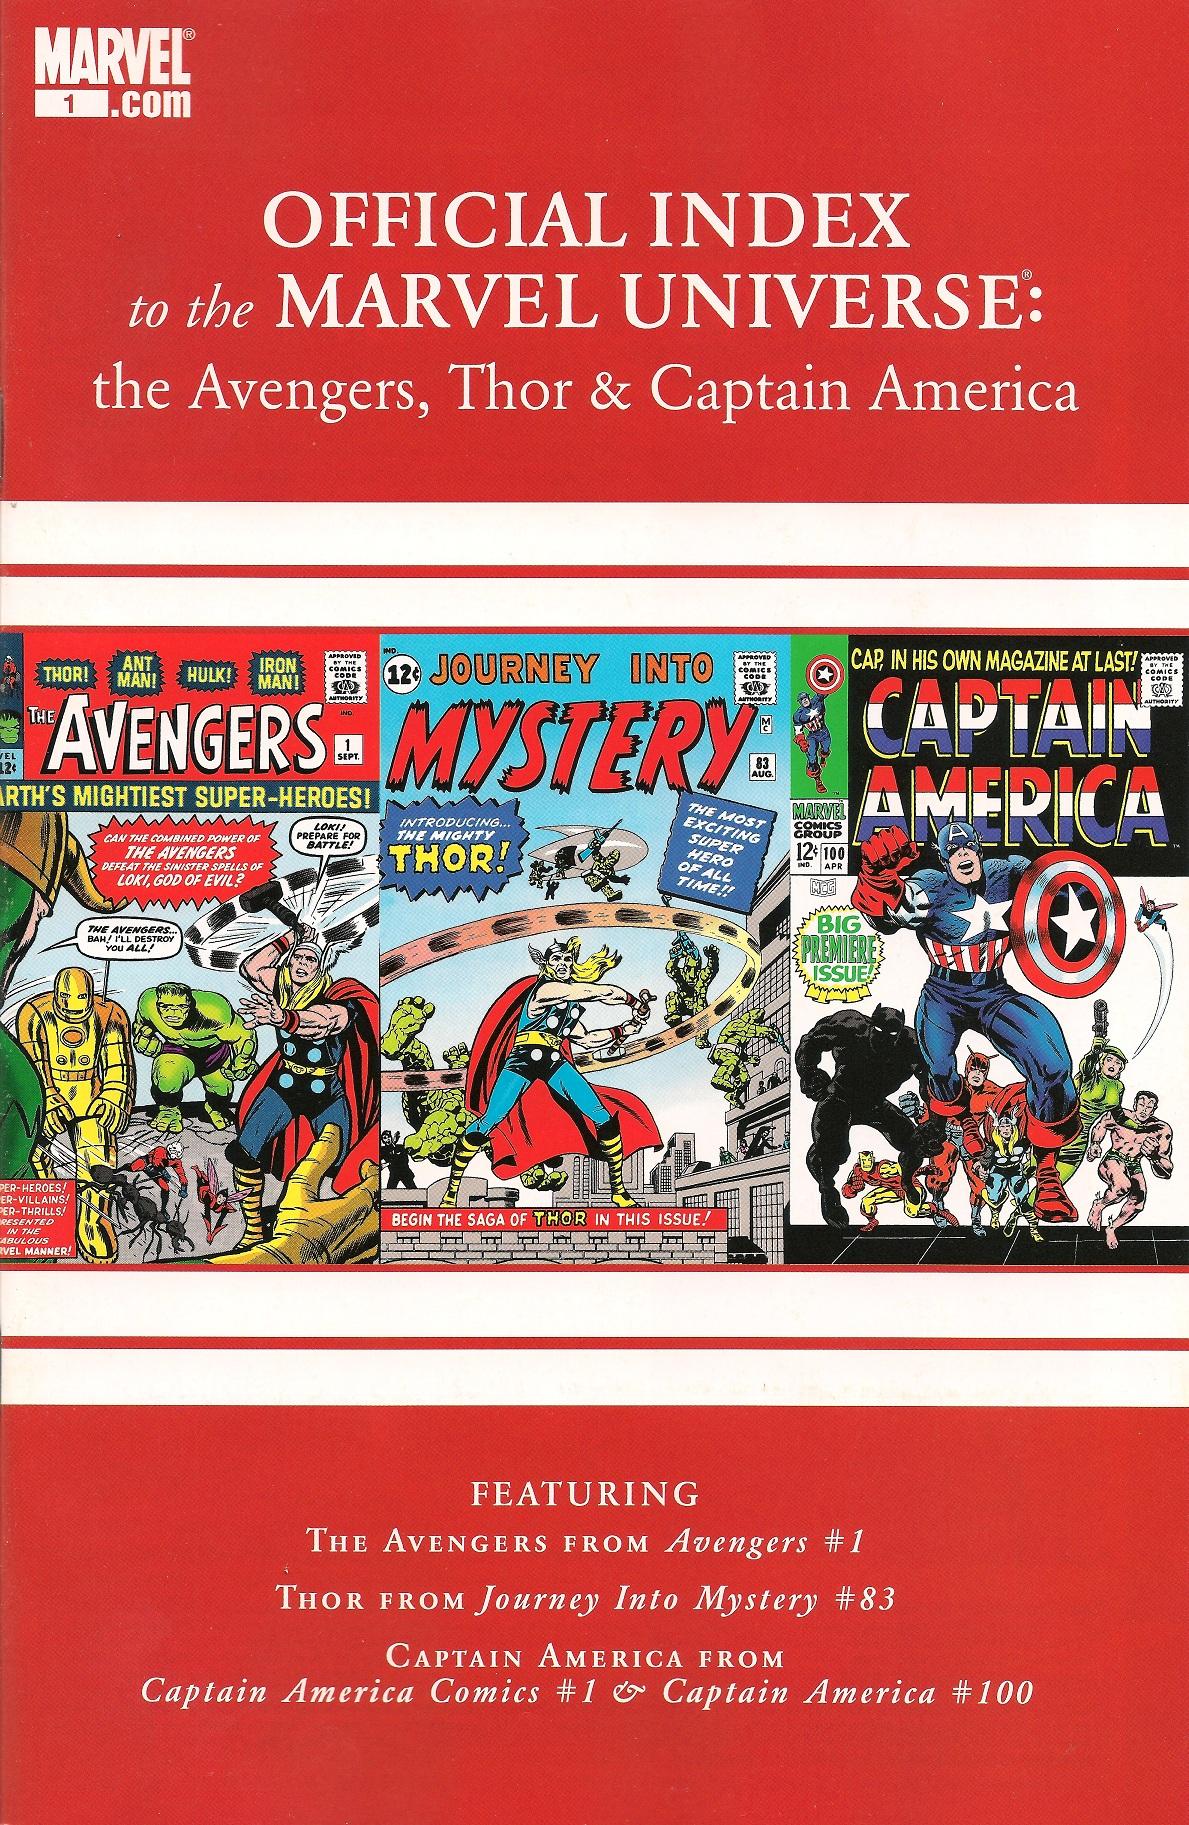 Avengers, Thor & Captain America: Official Index to the Marvel Universe Vol. 1 #1